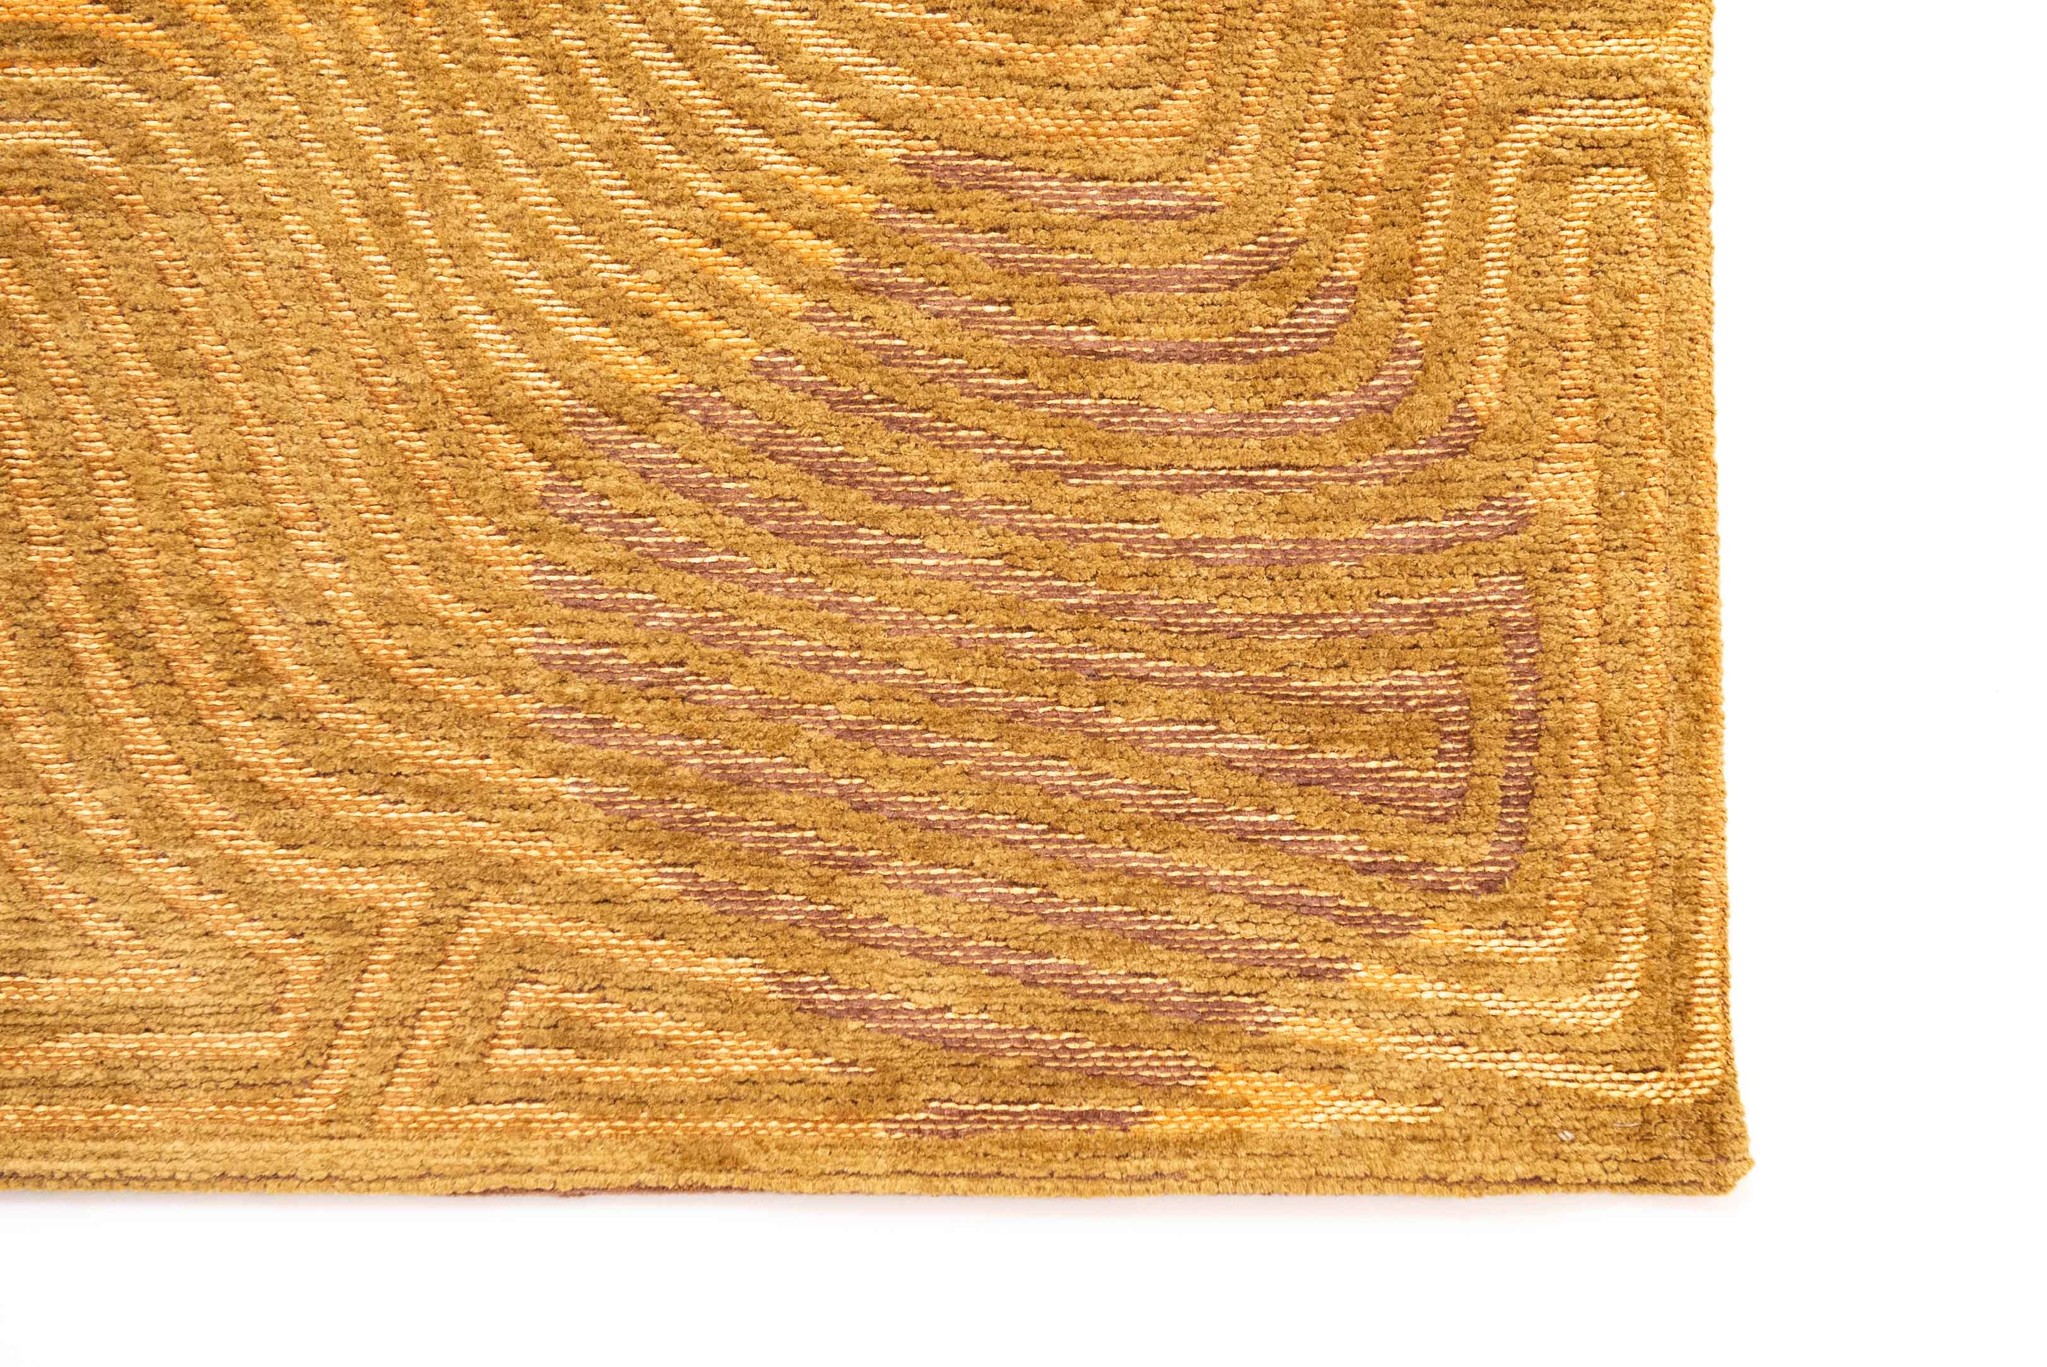 Gold Flatwoven Rug ☞ Size: 4' 7" x 6' 7" (140 x 200 cm)